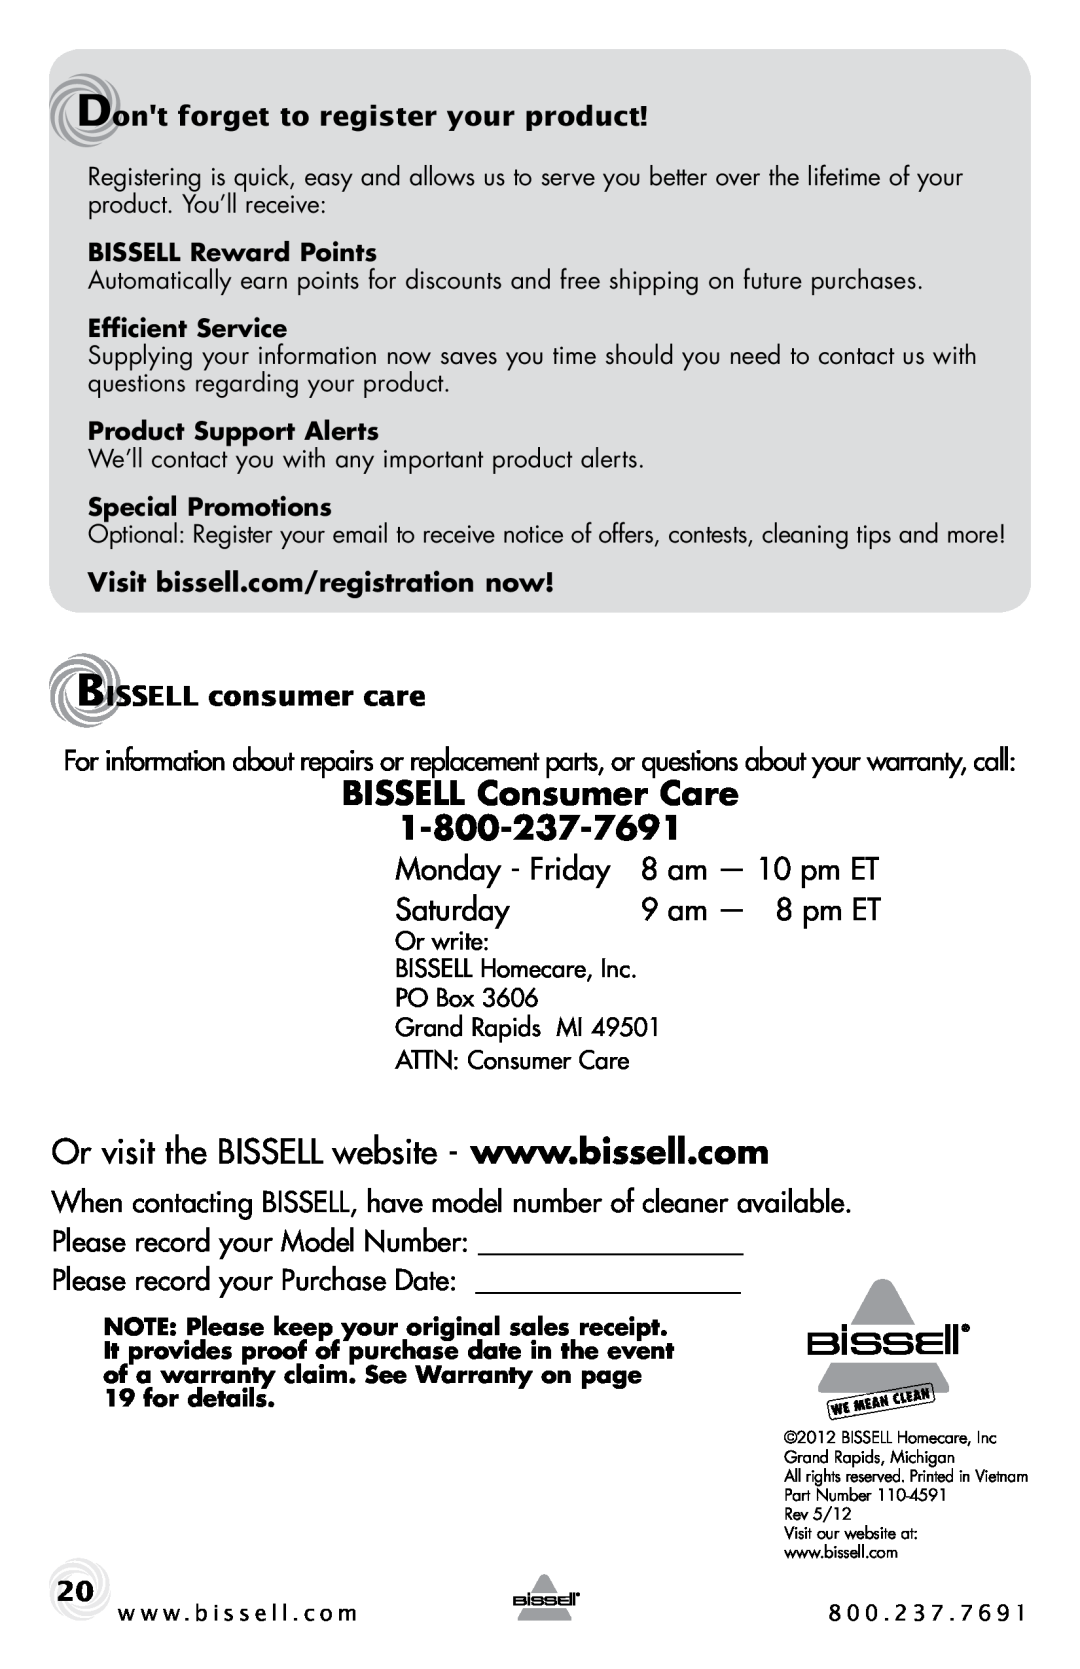 Bissell 61C5-G BISSELL Consumer Care, Dont forget to register your product, Monday - Friday, Saturday, am - 8 pm ET 